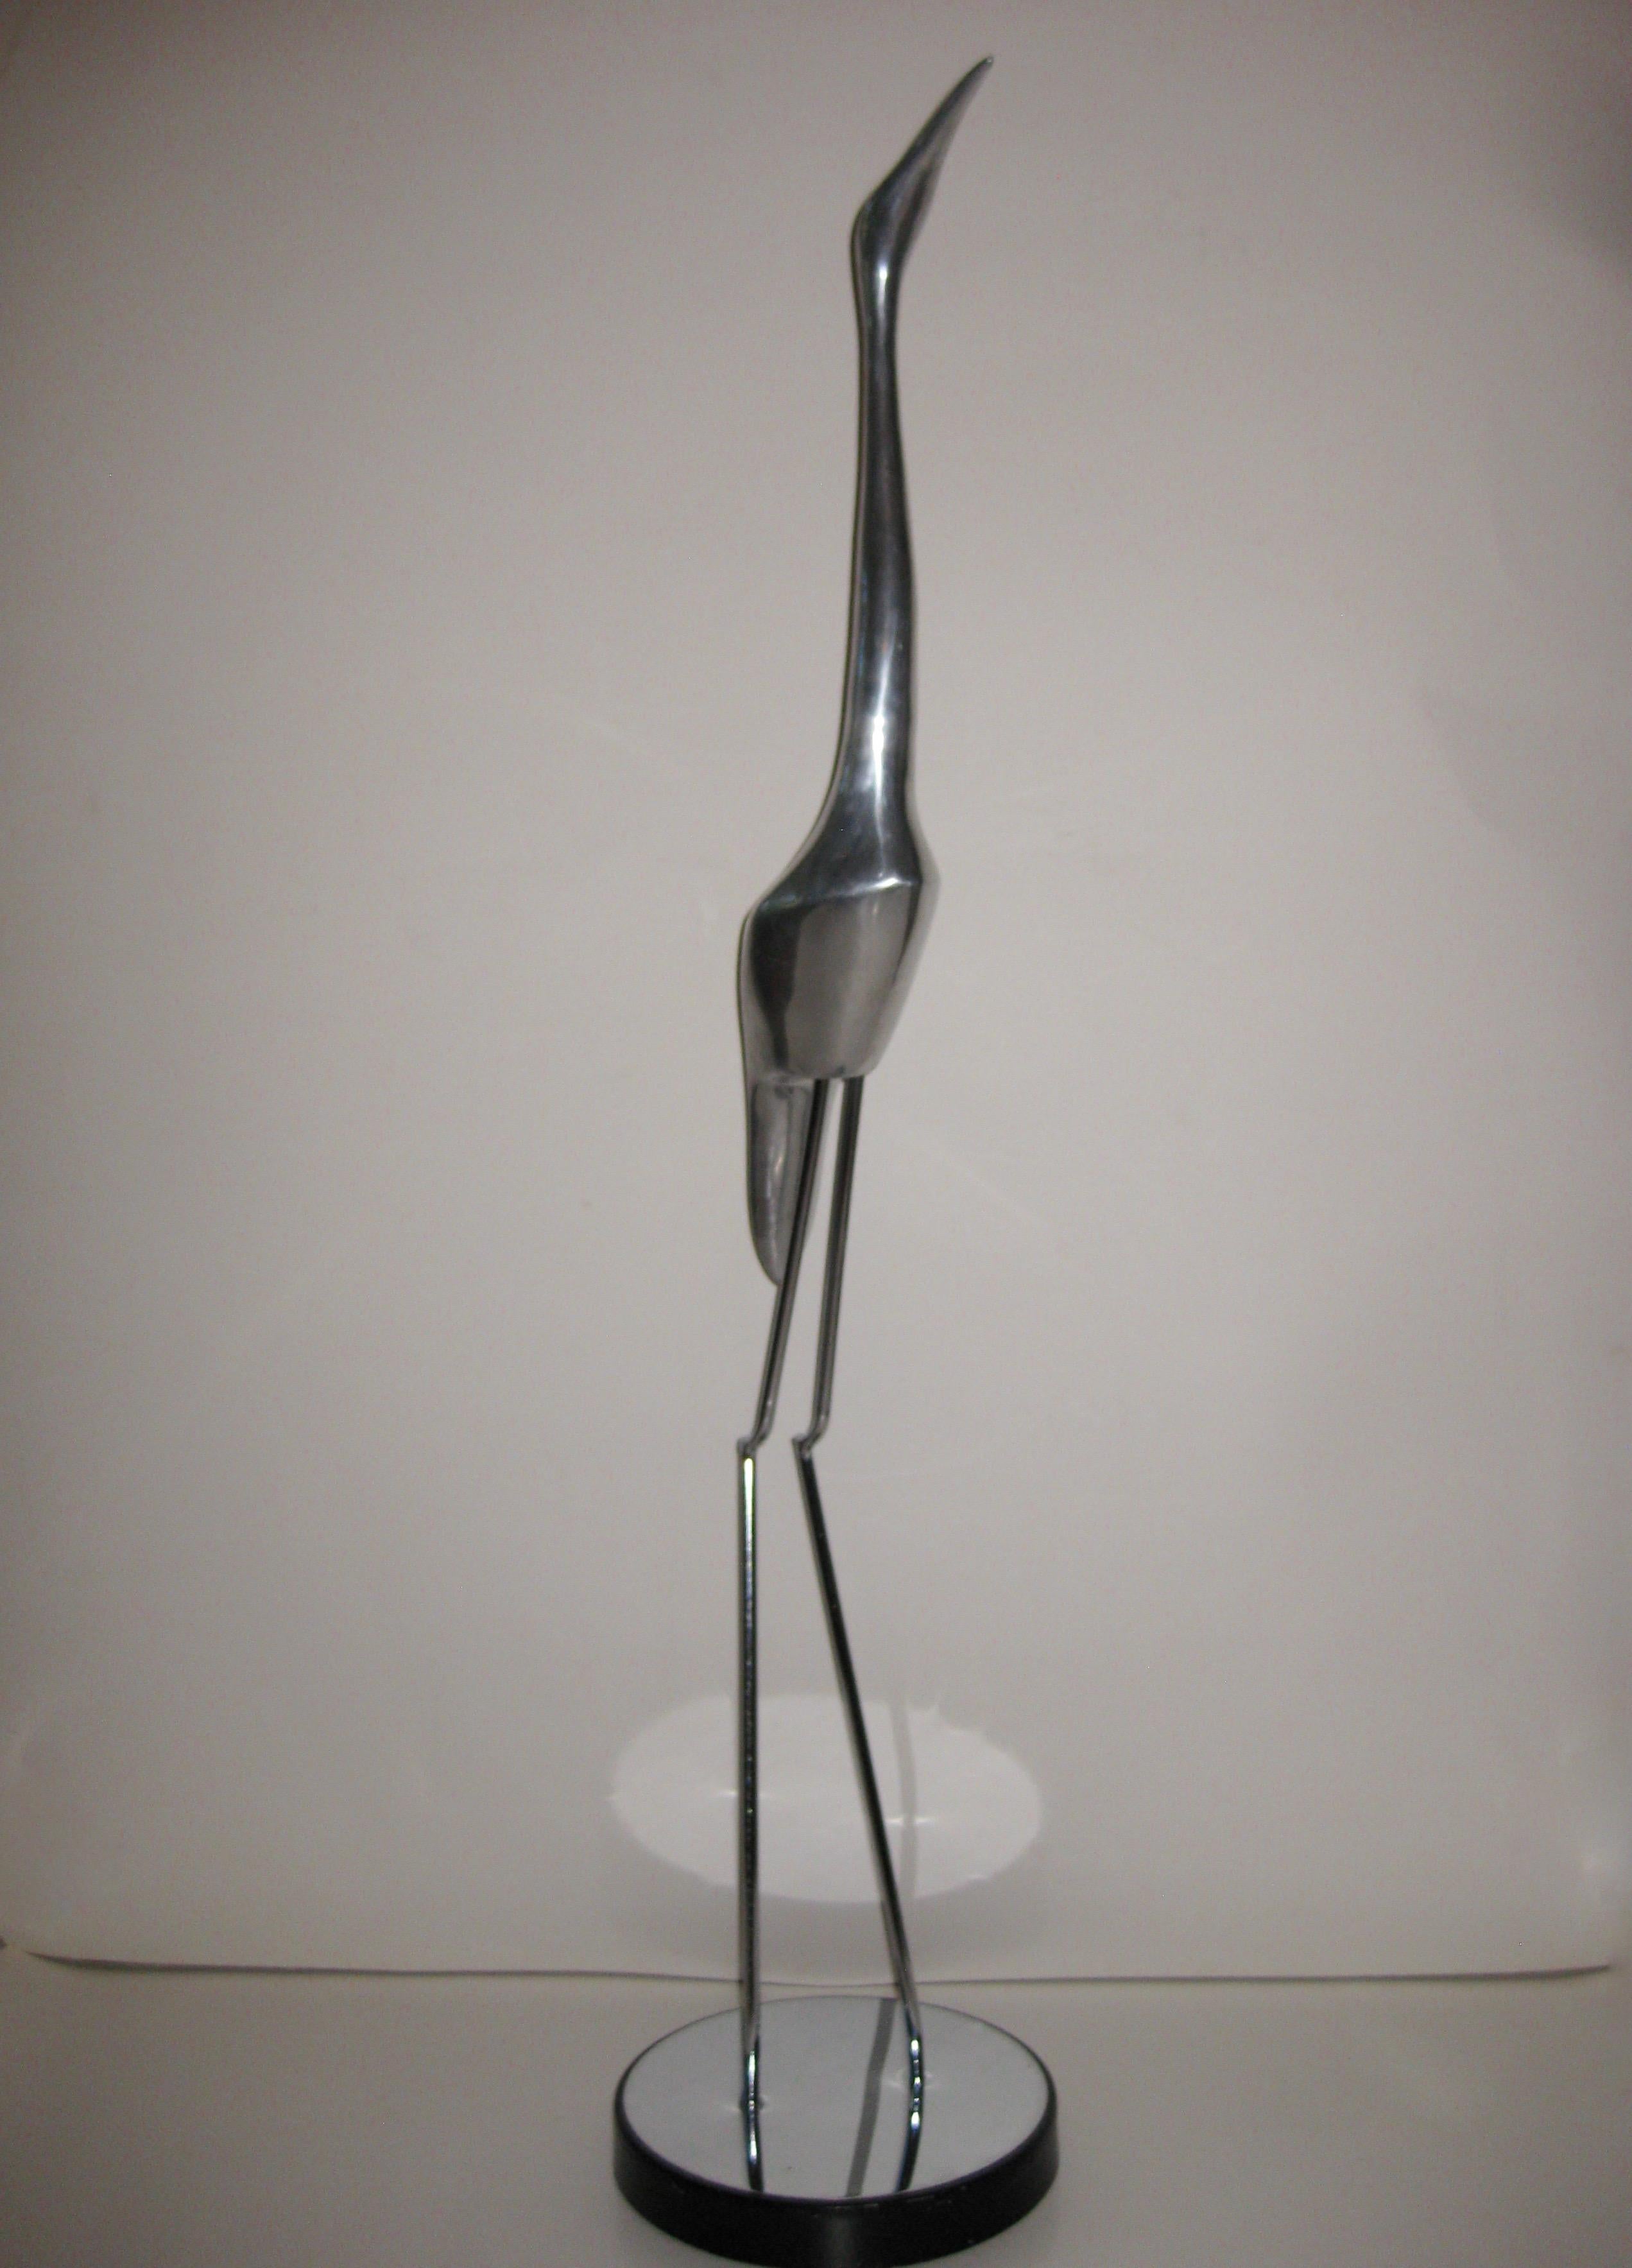 Created by Curtis Jere, this elegant, tall, 1970s floor sculpture is made of a polished, cast aluminium body with chromed metal legs and top plate on base. Base is made of black painted steel. Was signed “C. Jere” on base, but has been worn off.
   